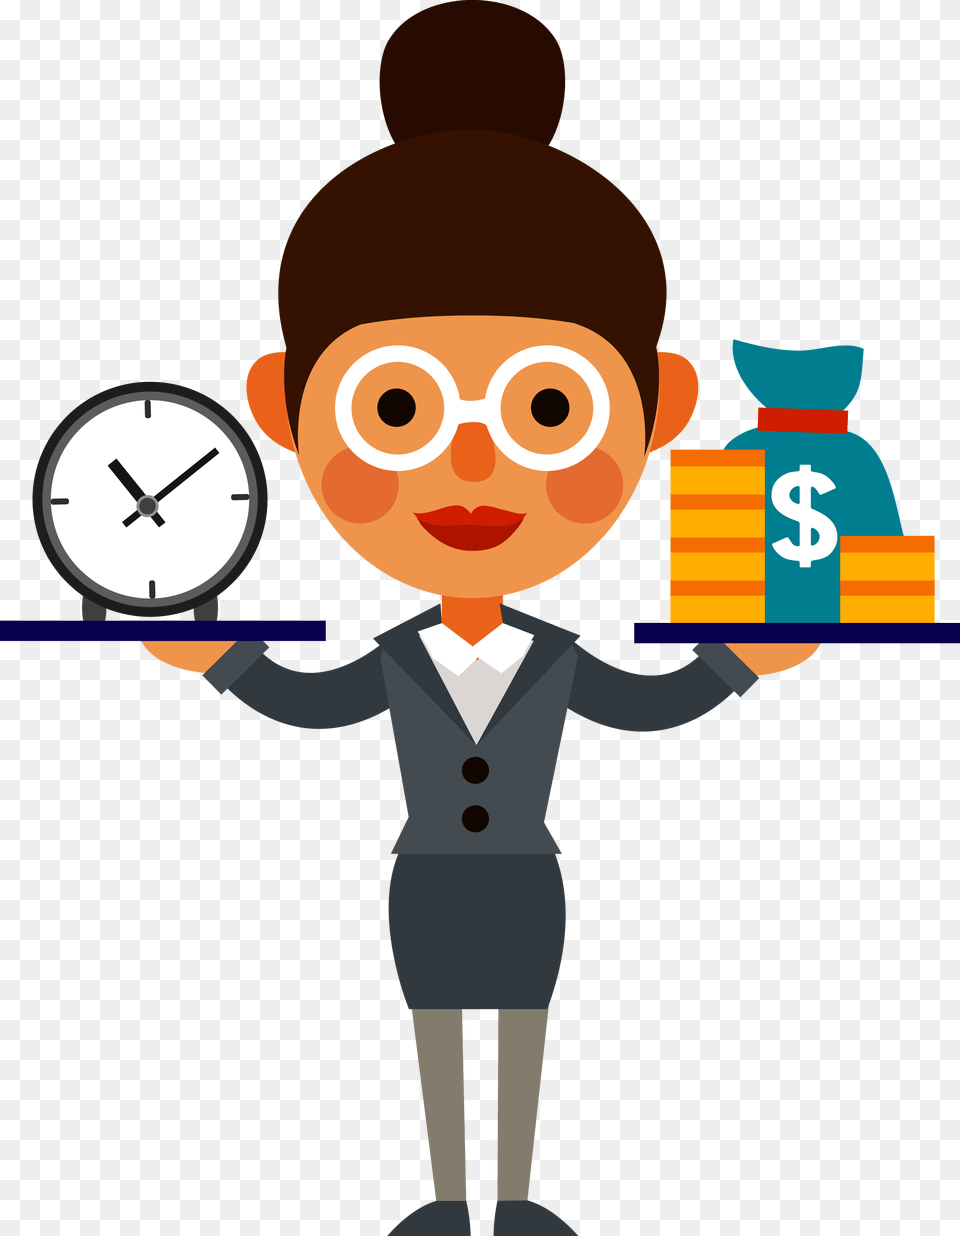 Business Adobe Illustrator Clip Art Free Clip Art Time Money, Person, Face, Head Png Image